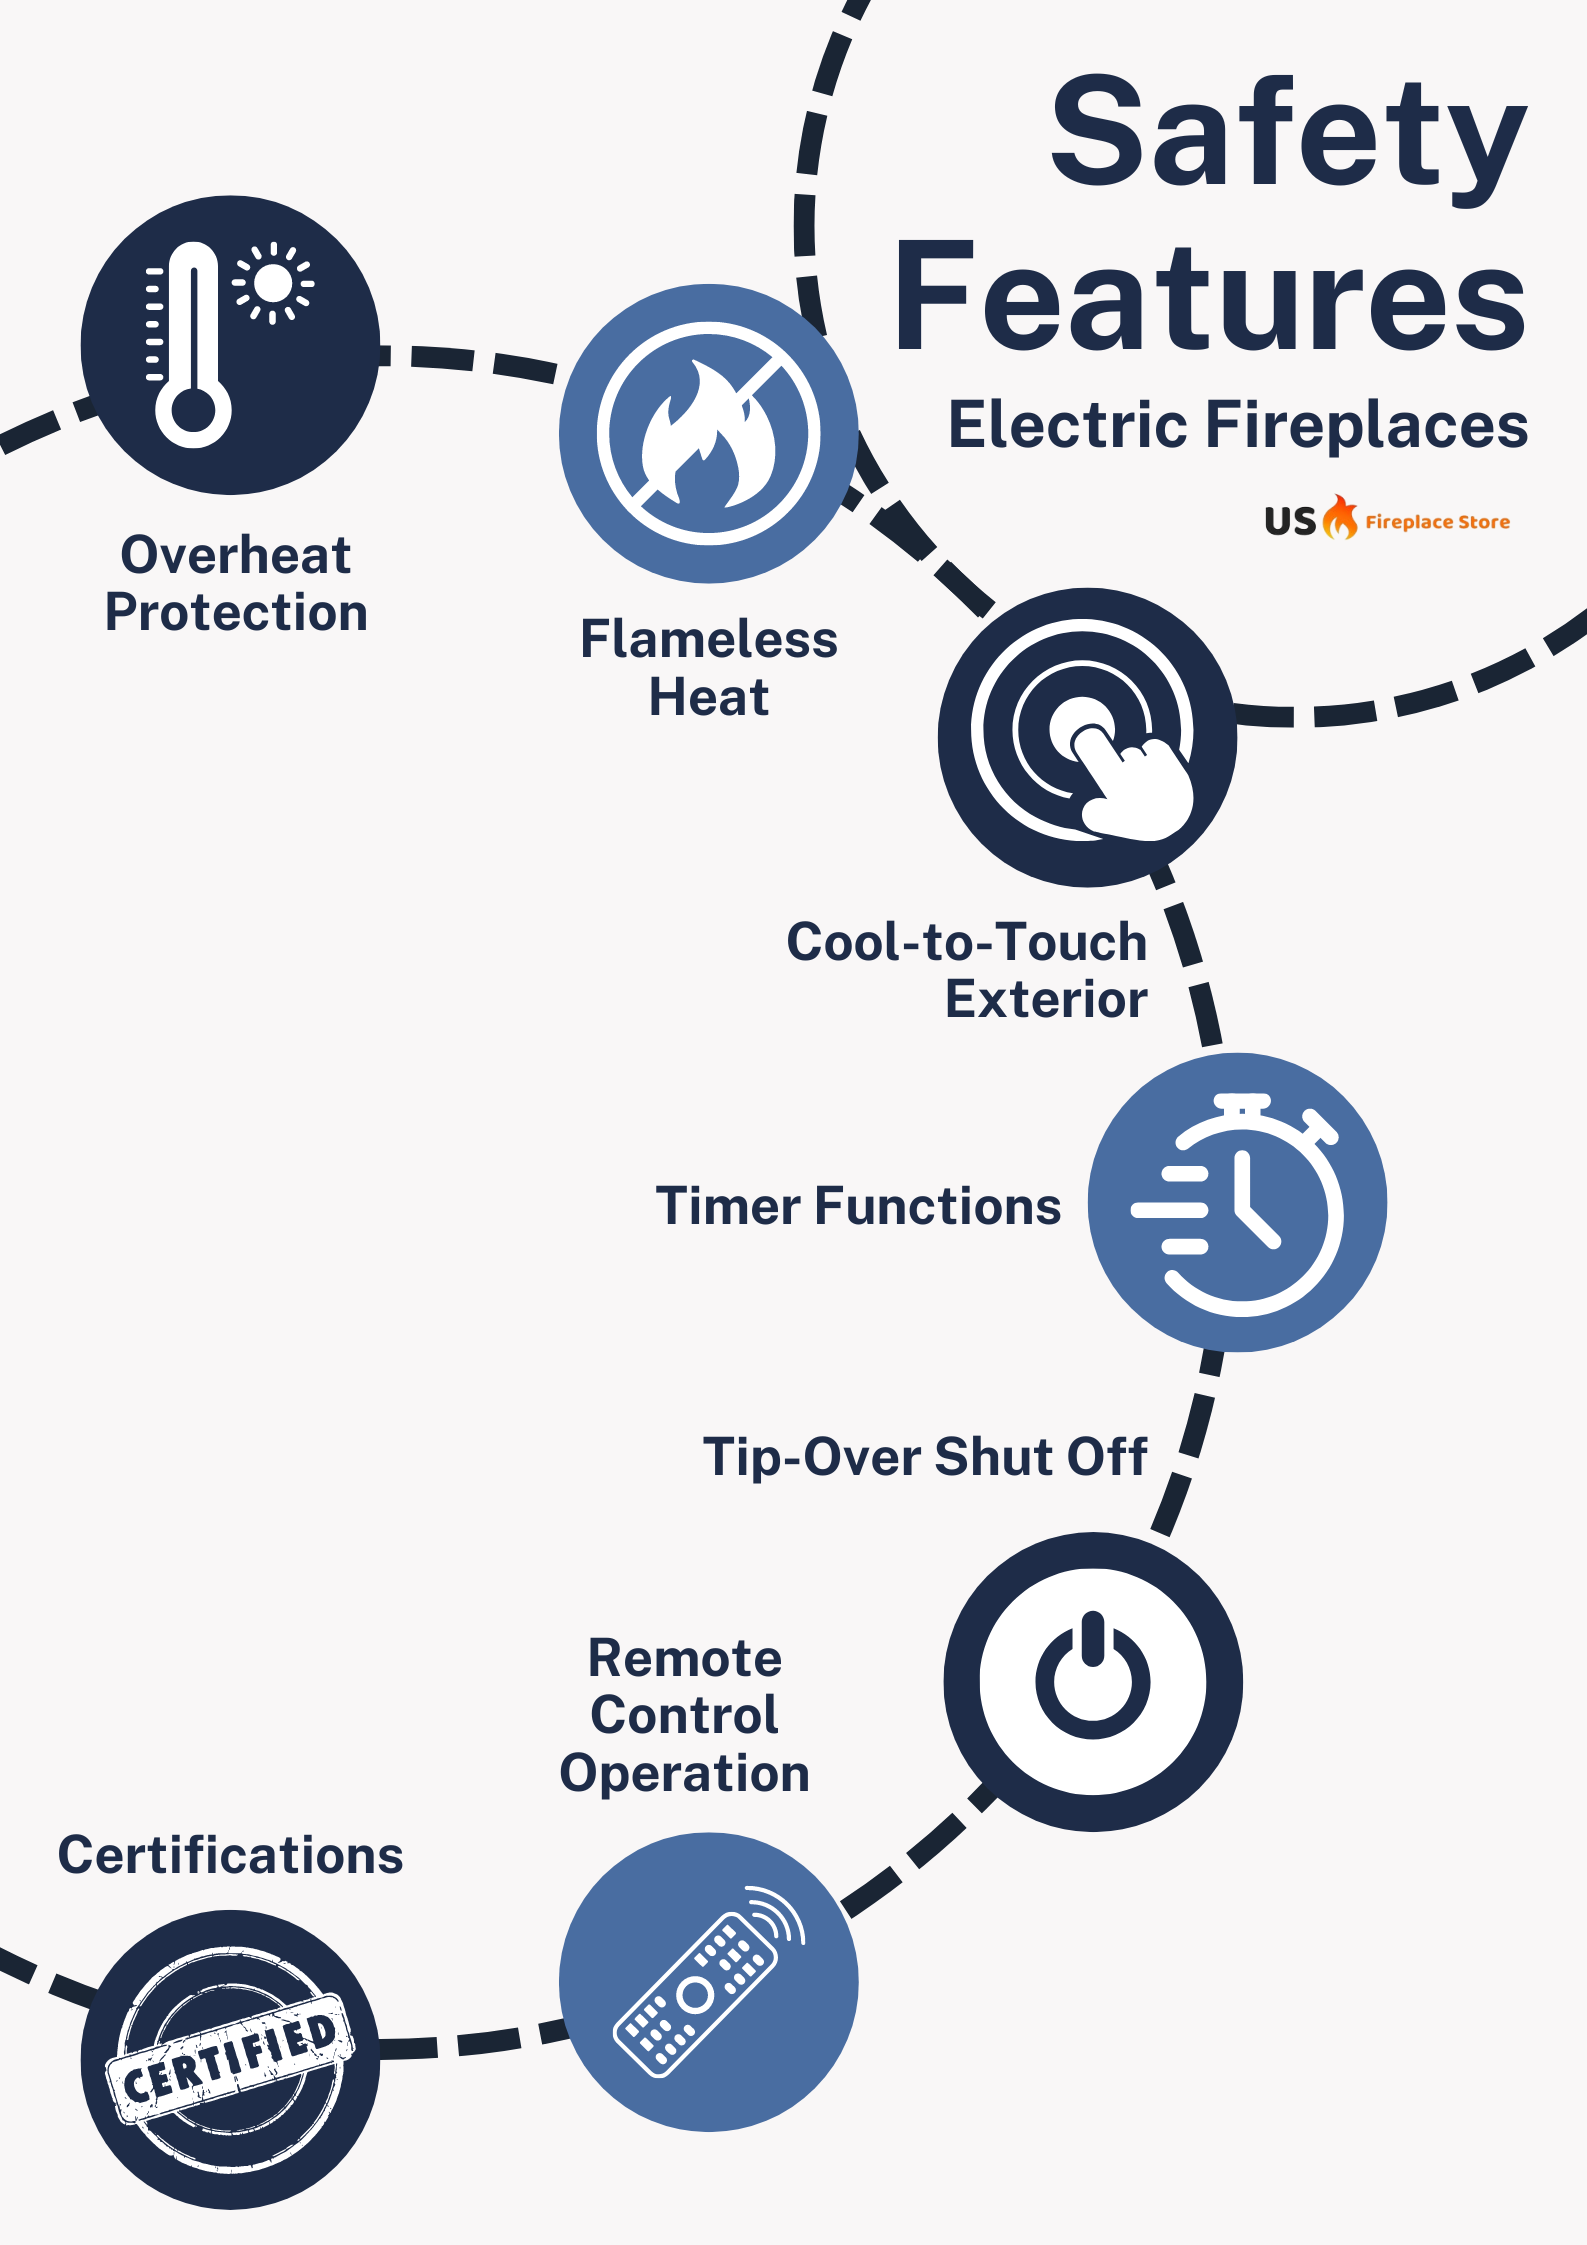 Safety Features of Electric Fireplaces